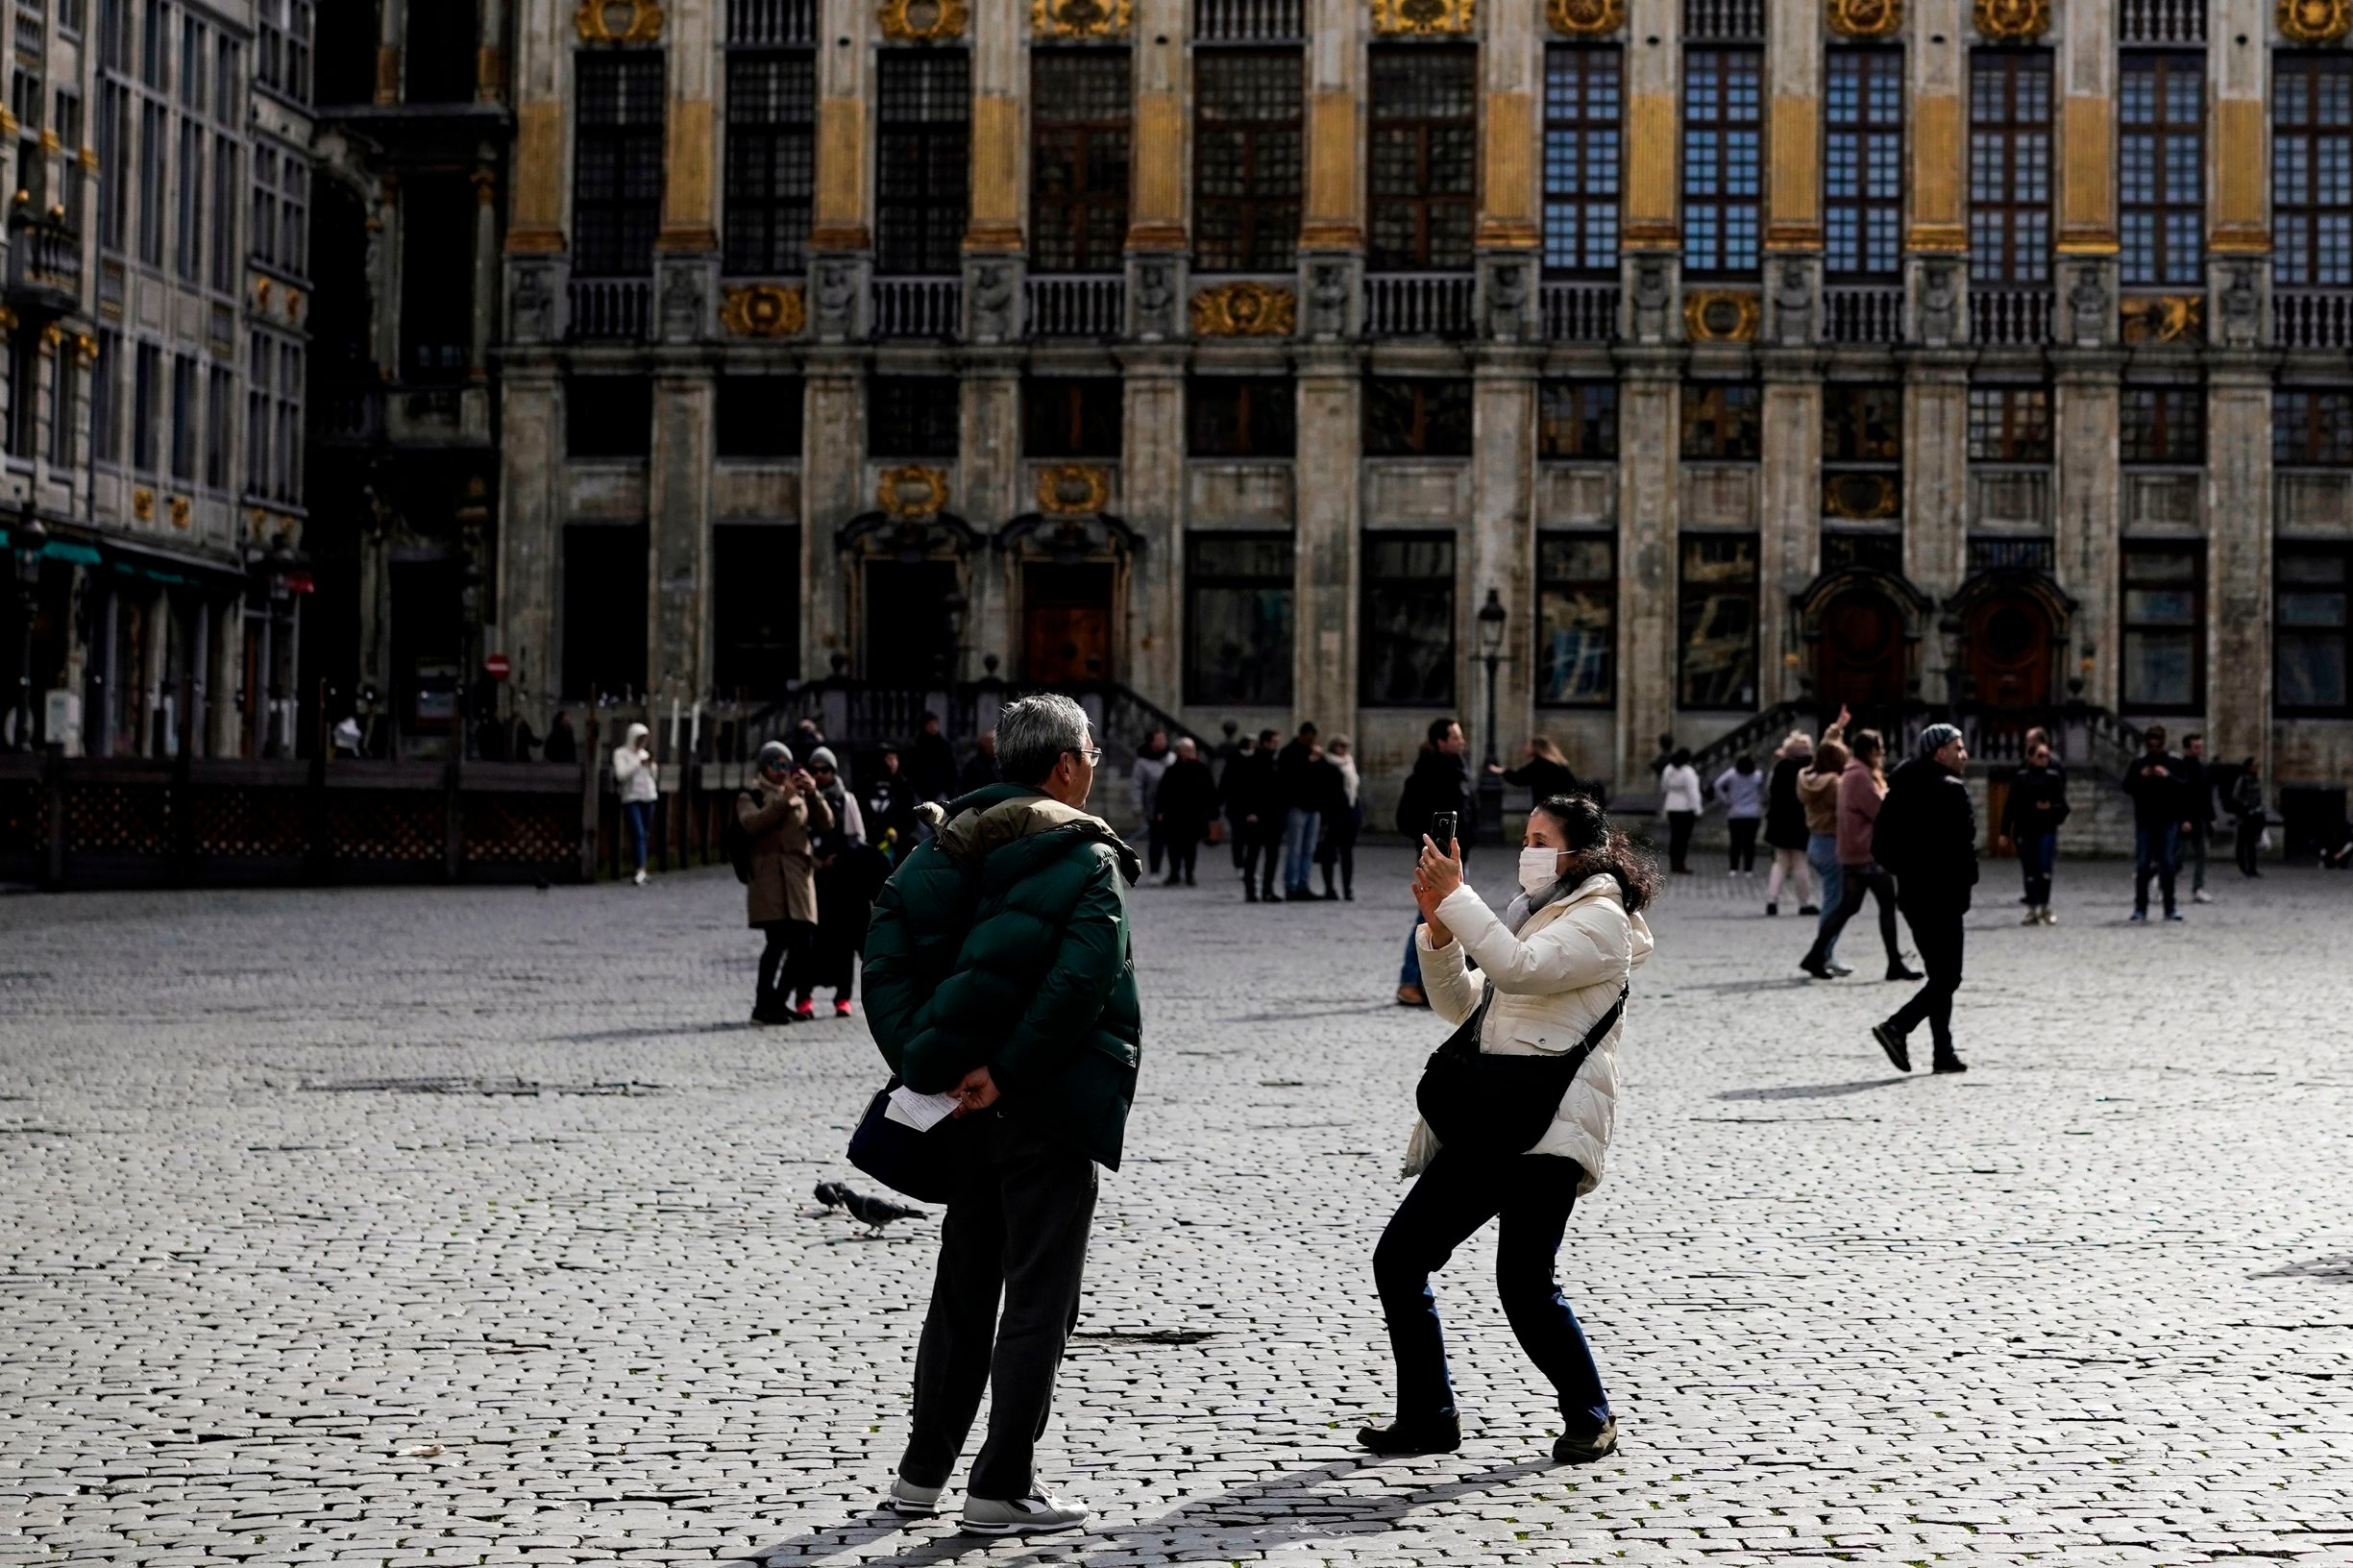 A tourist wears a protective face mask as she takes a picture with her mobile phone at the Grand-Place in the centre of Brussels, amid the outbreak of COVID-19, caused by the novel coronavirus. - Belgium close schools, cancel all cultural events and shutter bars and restaurants to stave off the spread of the coronavirus outbreak.  Beginning on March 14, only stores that provide essential services -- such as pharmacies and grocery stores-- will remain open under normal conditions. (Photo by Kenzo TRIBOUILLARD / AFP)